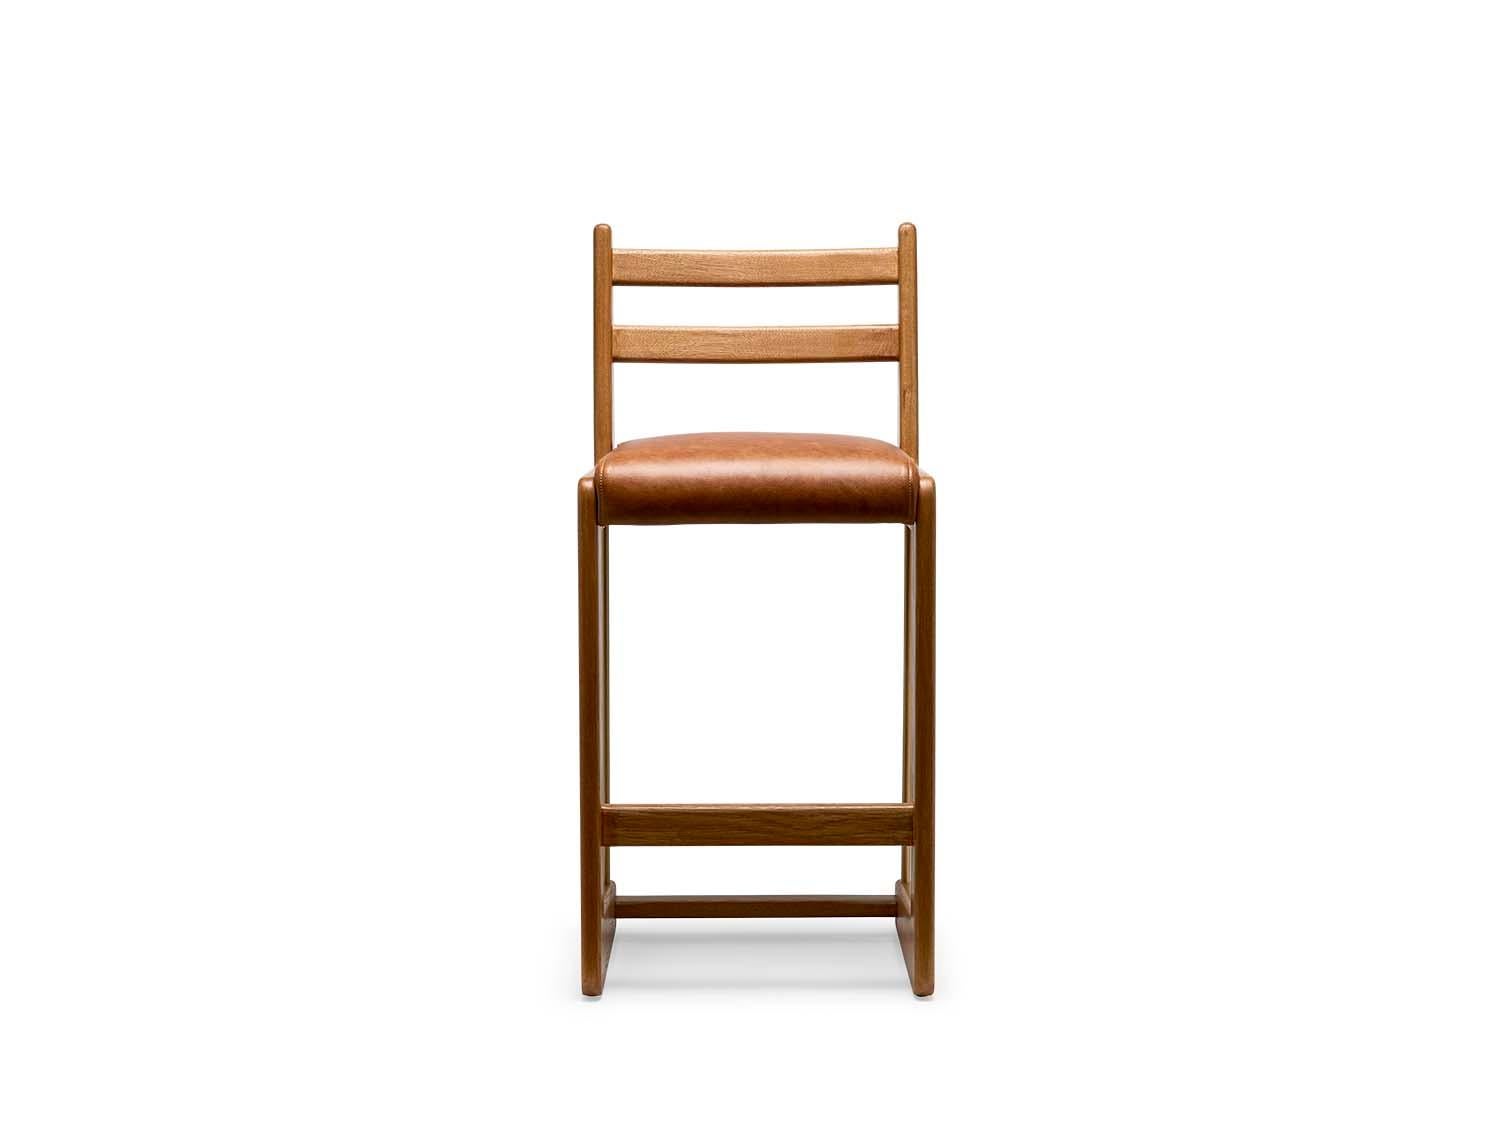 The Cruz barstool is made from a solid American walnut or white oak frame that features a cantilevered shape and lacquered brass stretchers. The seat is upholstered.

The Lawson-Fenning Collection is designed and handmade in Los Angeles, California.